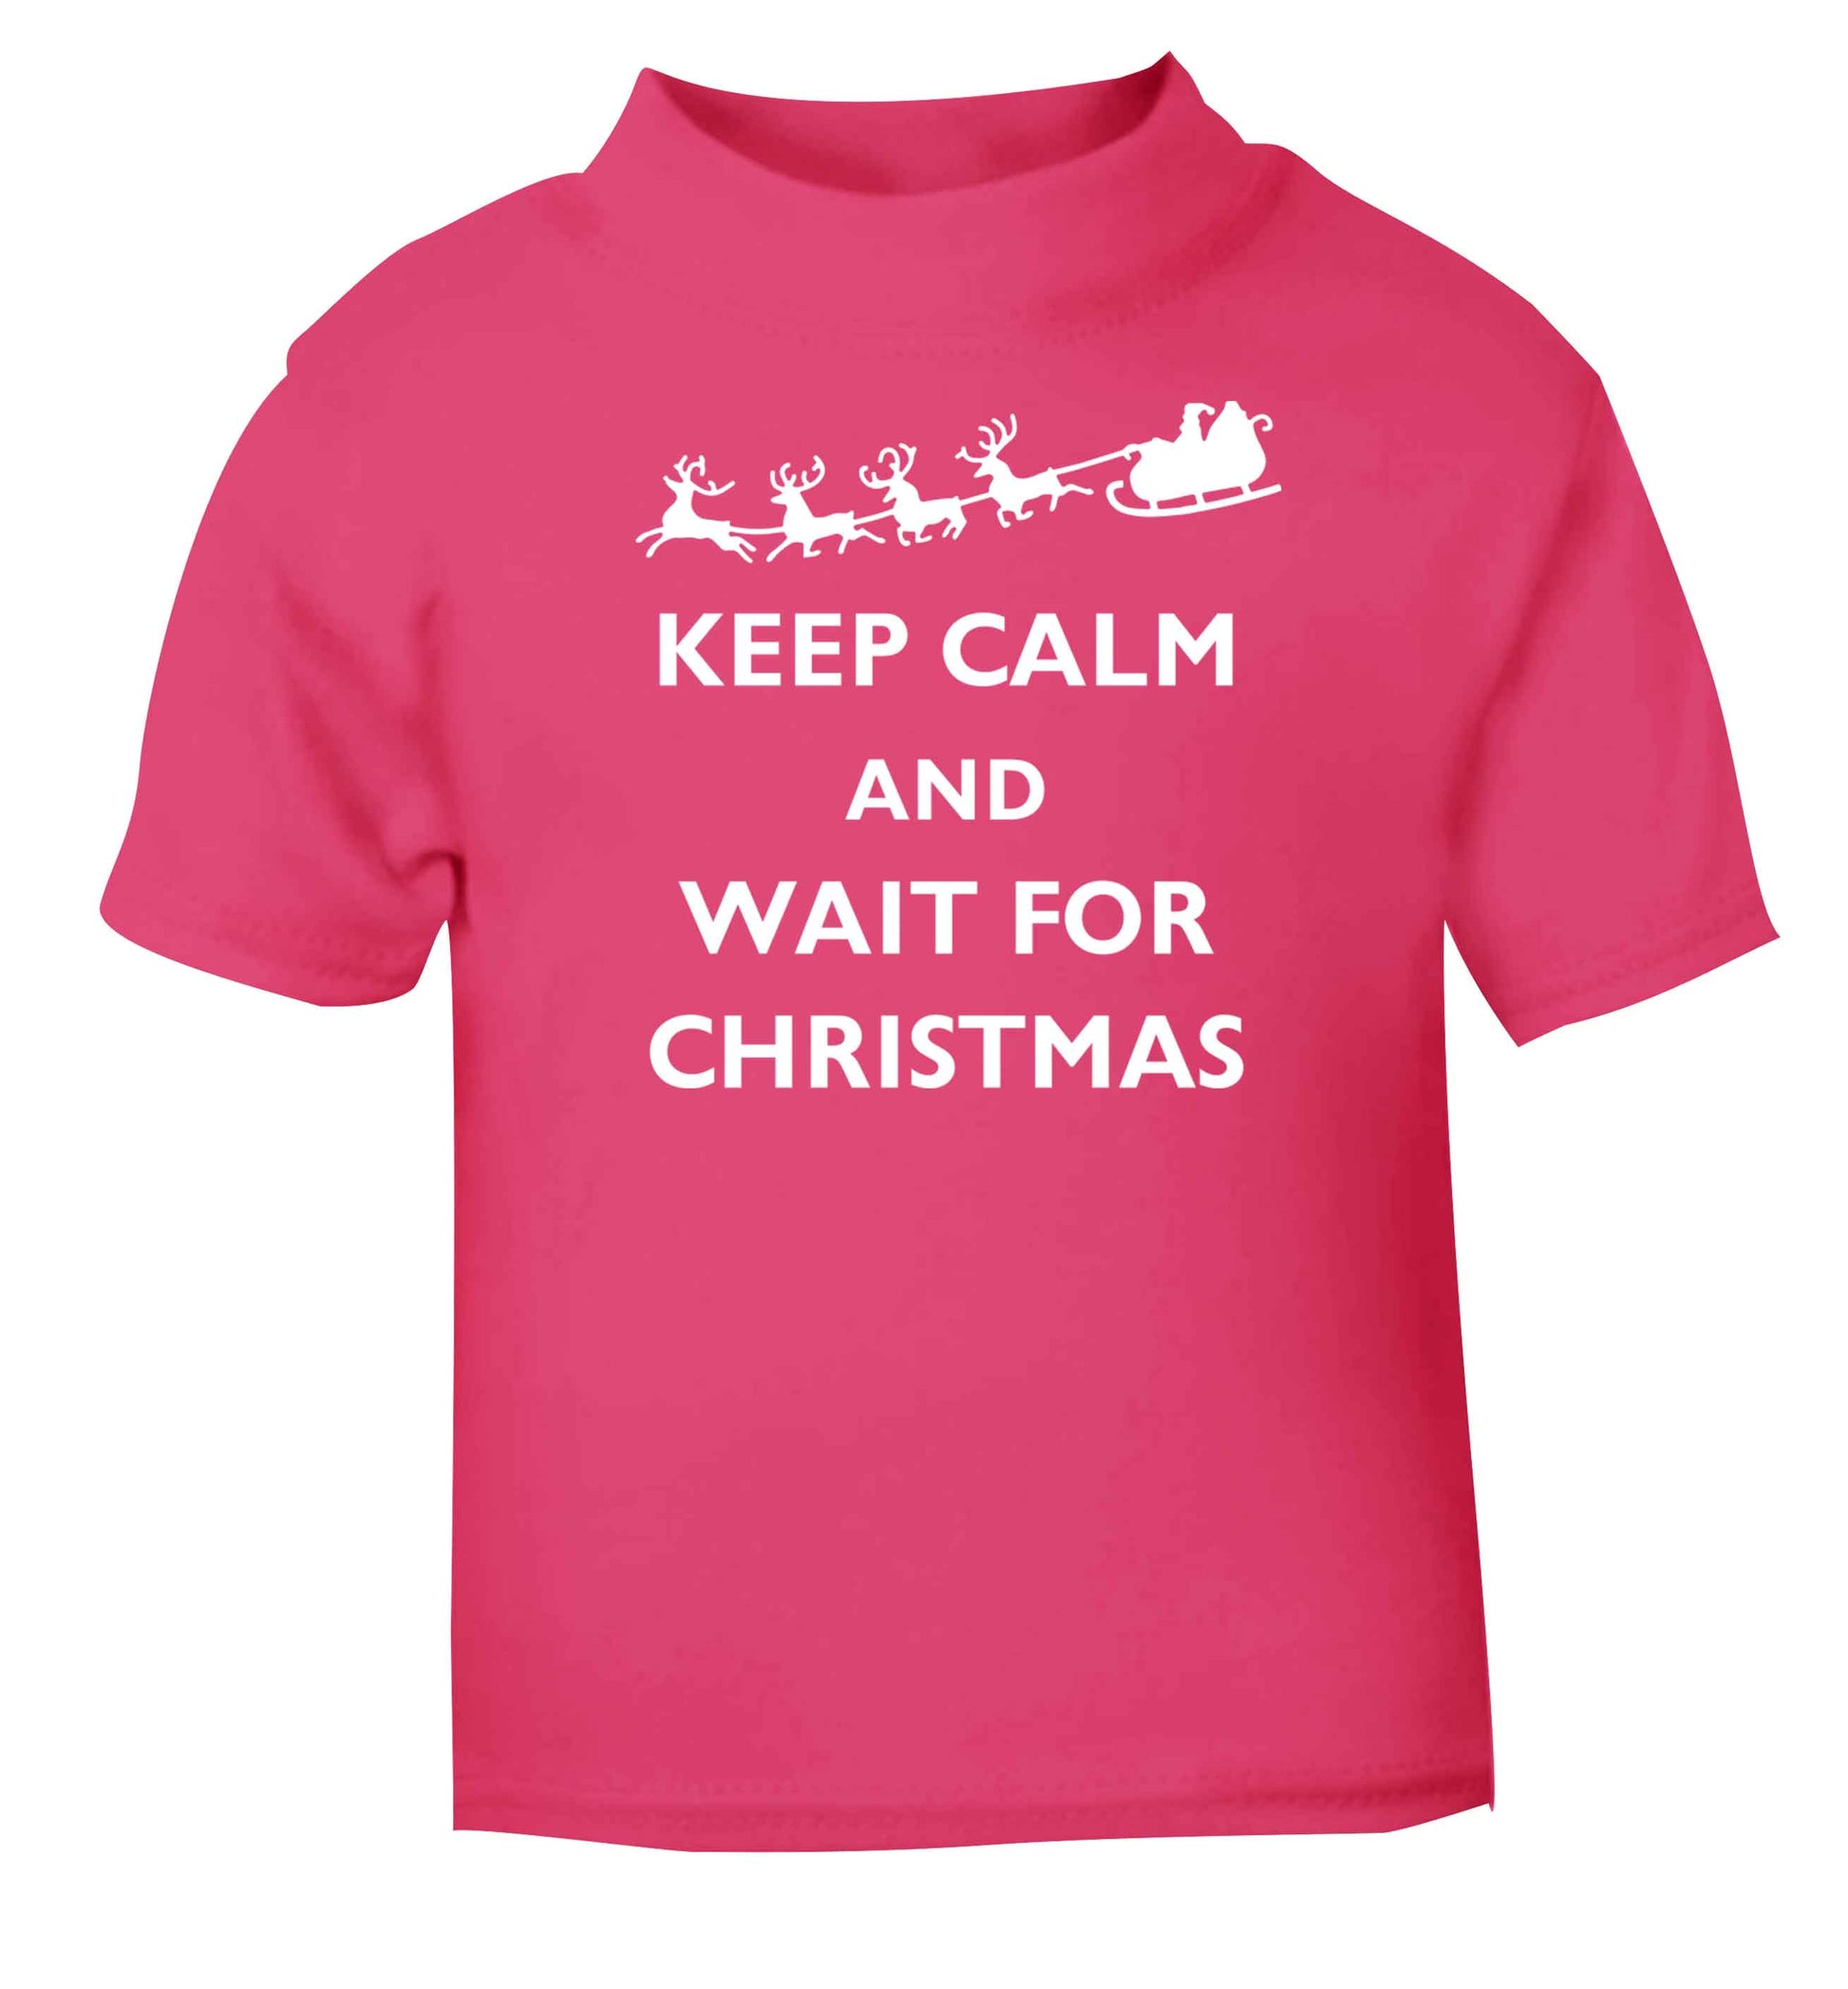 Keep calm and wait for Christmas pink baby toddler Tshirt 2 Years